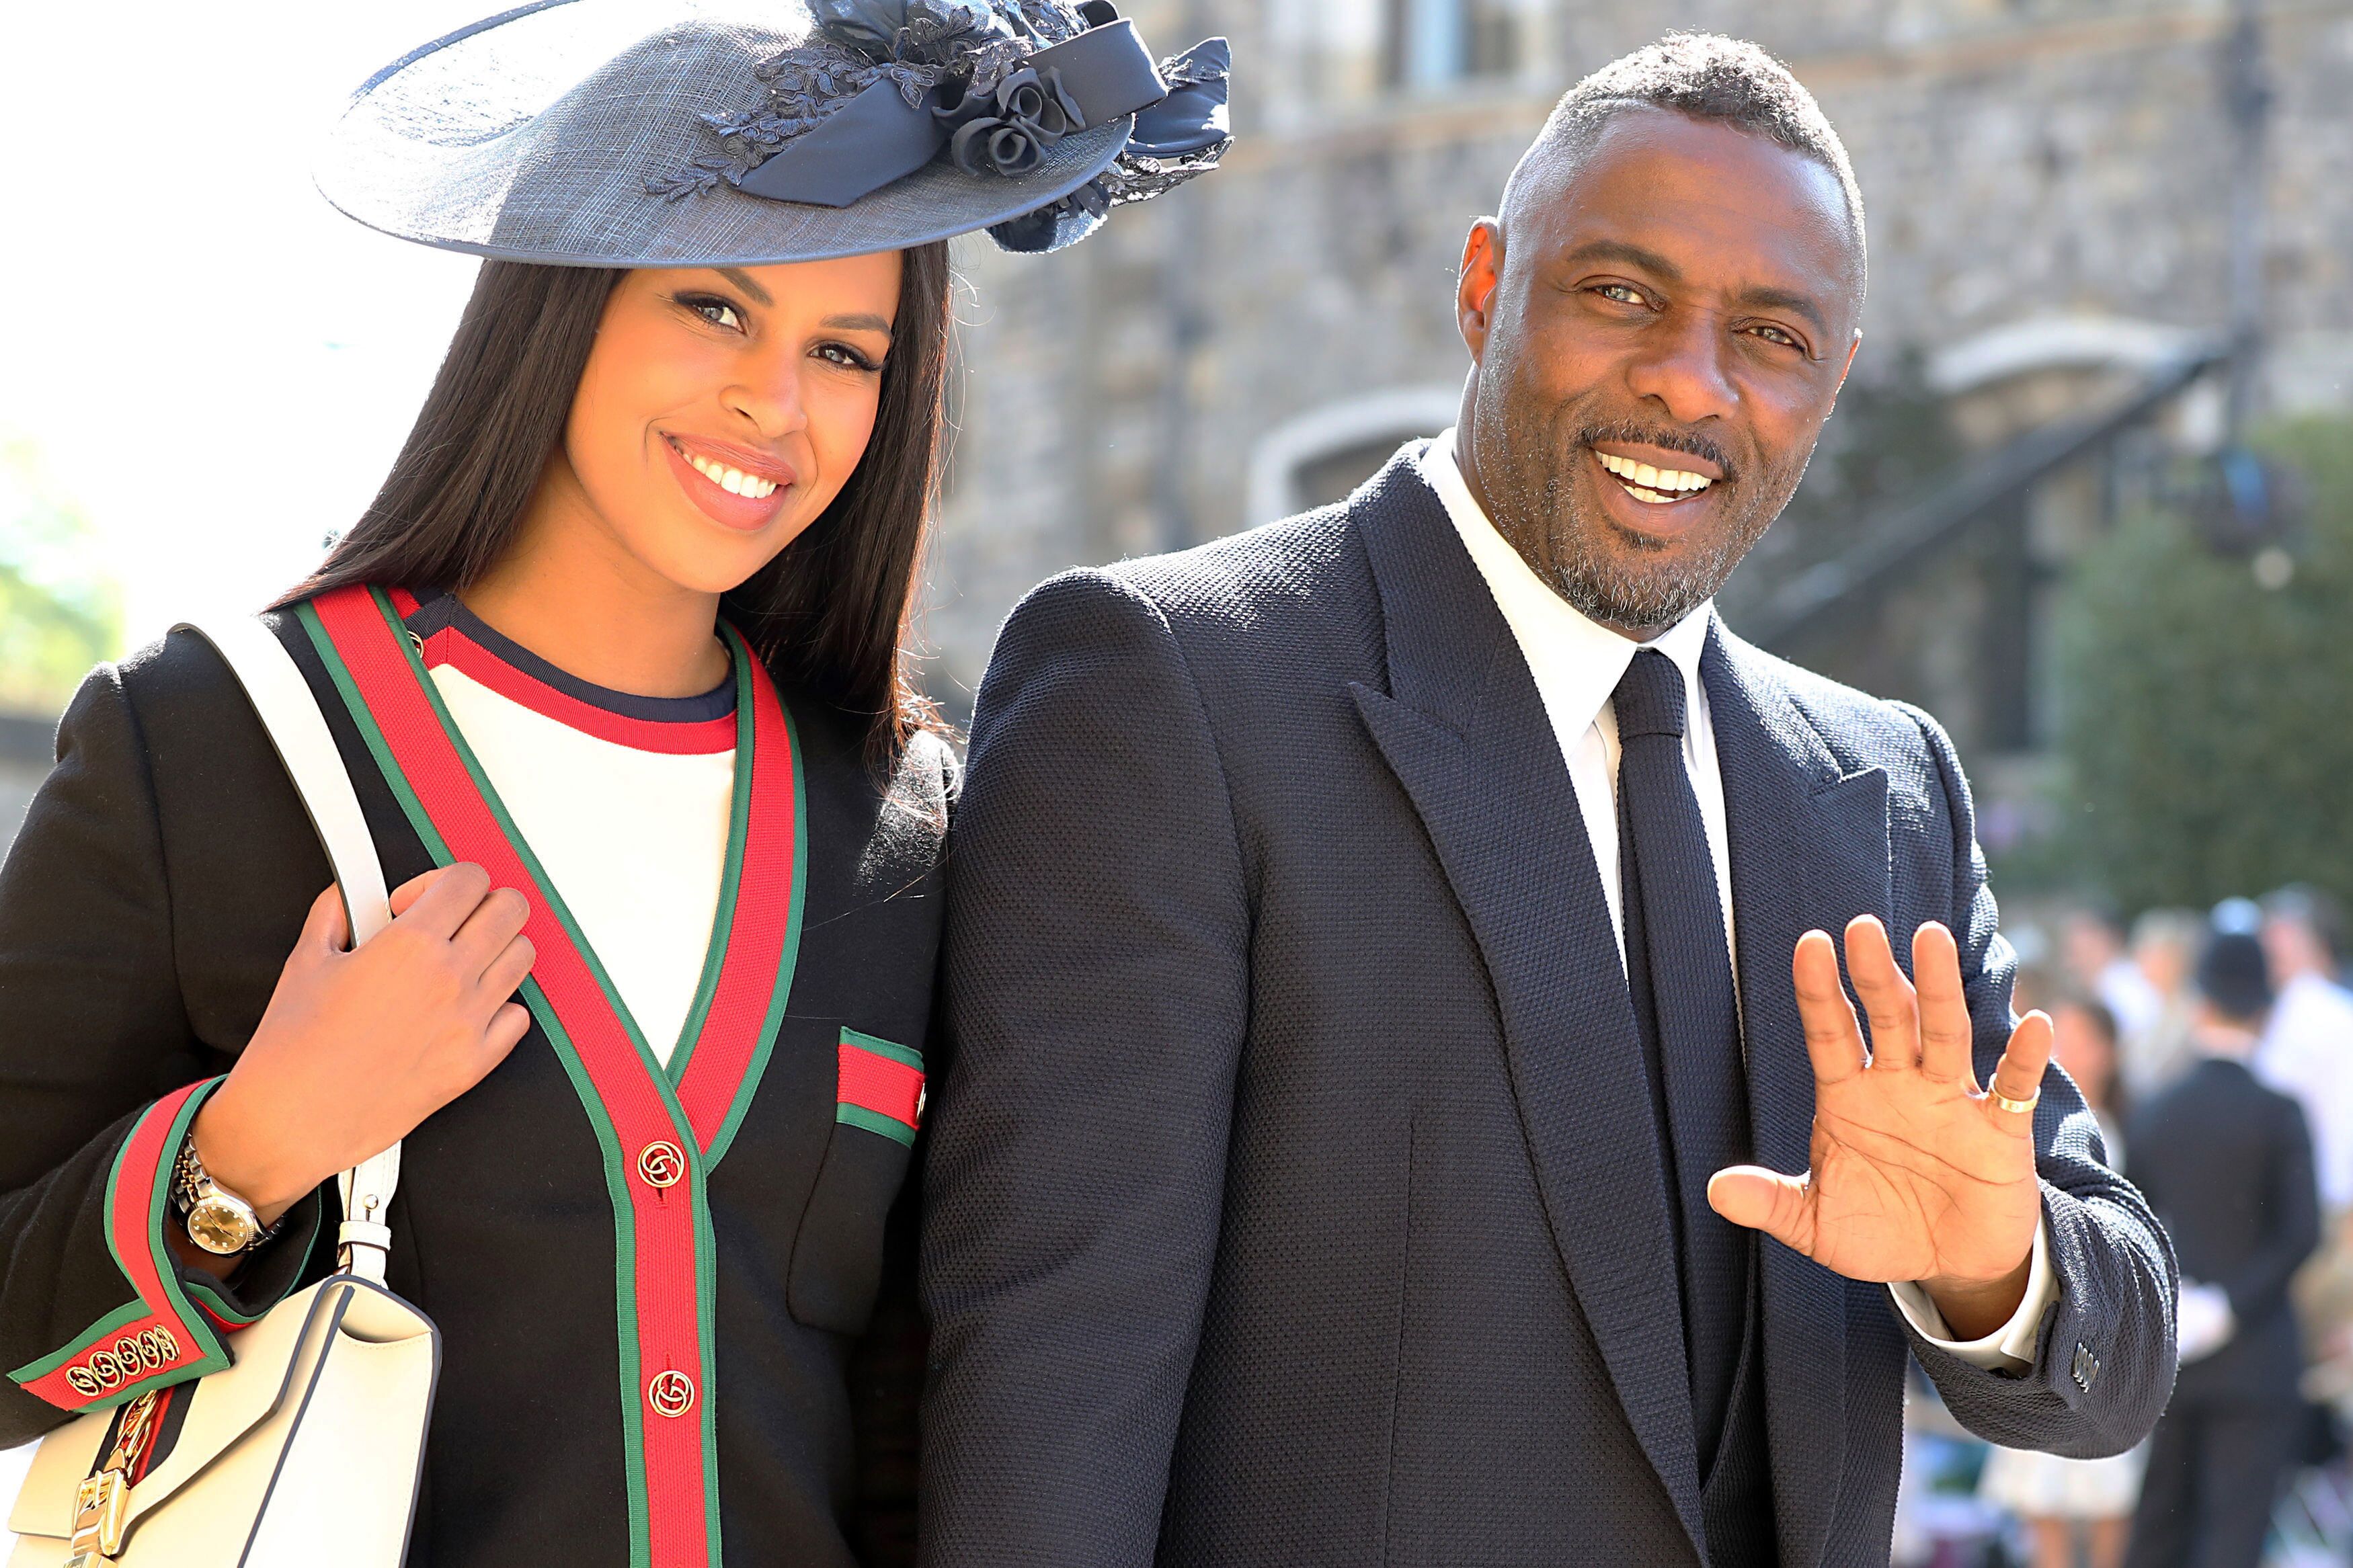 Idris Elba and his wife, Sabrina Dhowre at St. George's Chapel at the Windsor Castle attending Prince Harry and Meghan Markle's royal wedding. in May 2018. | Photo: Getty Images